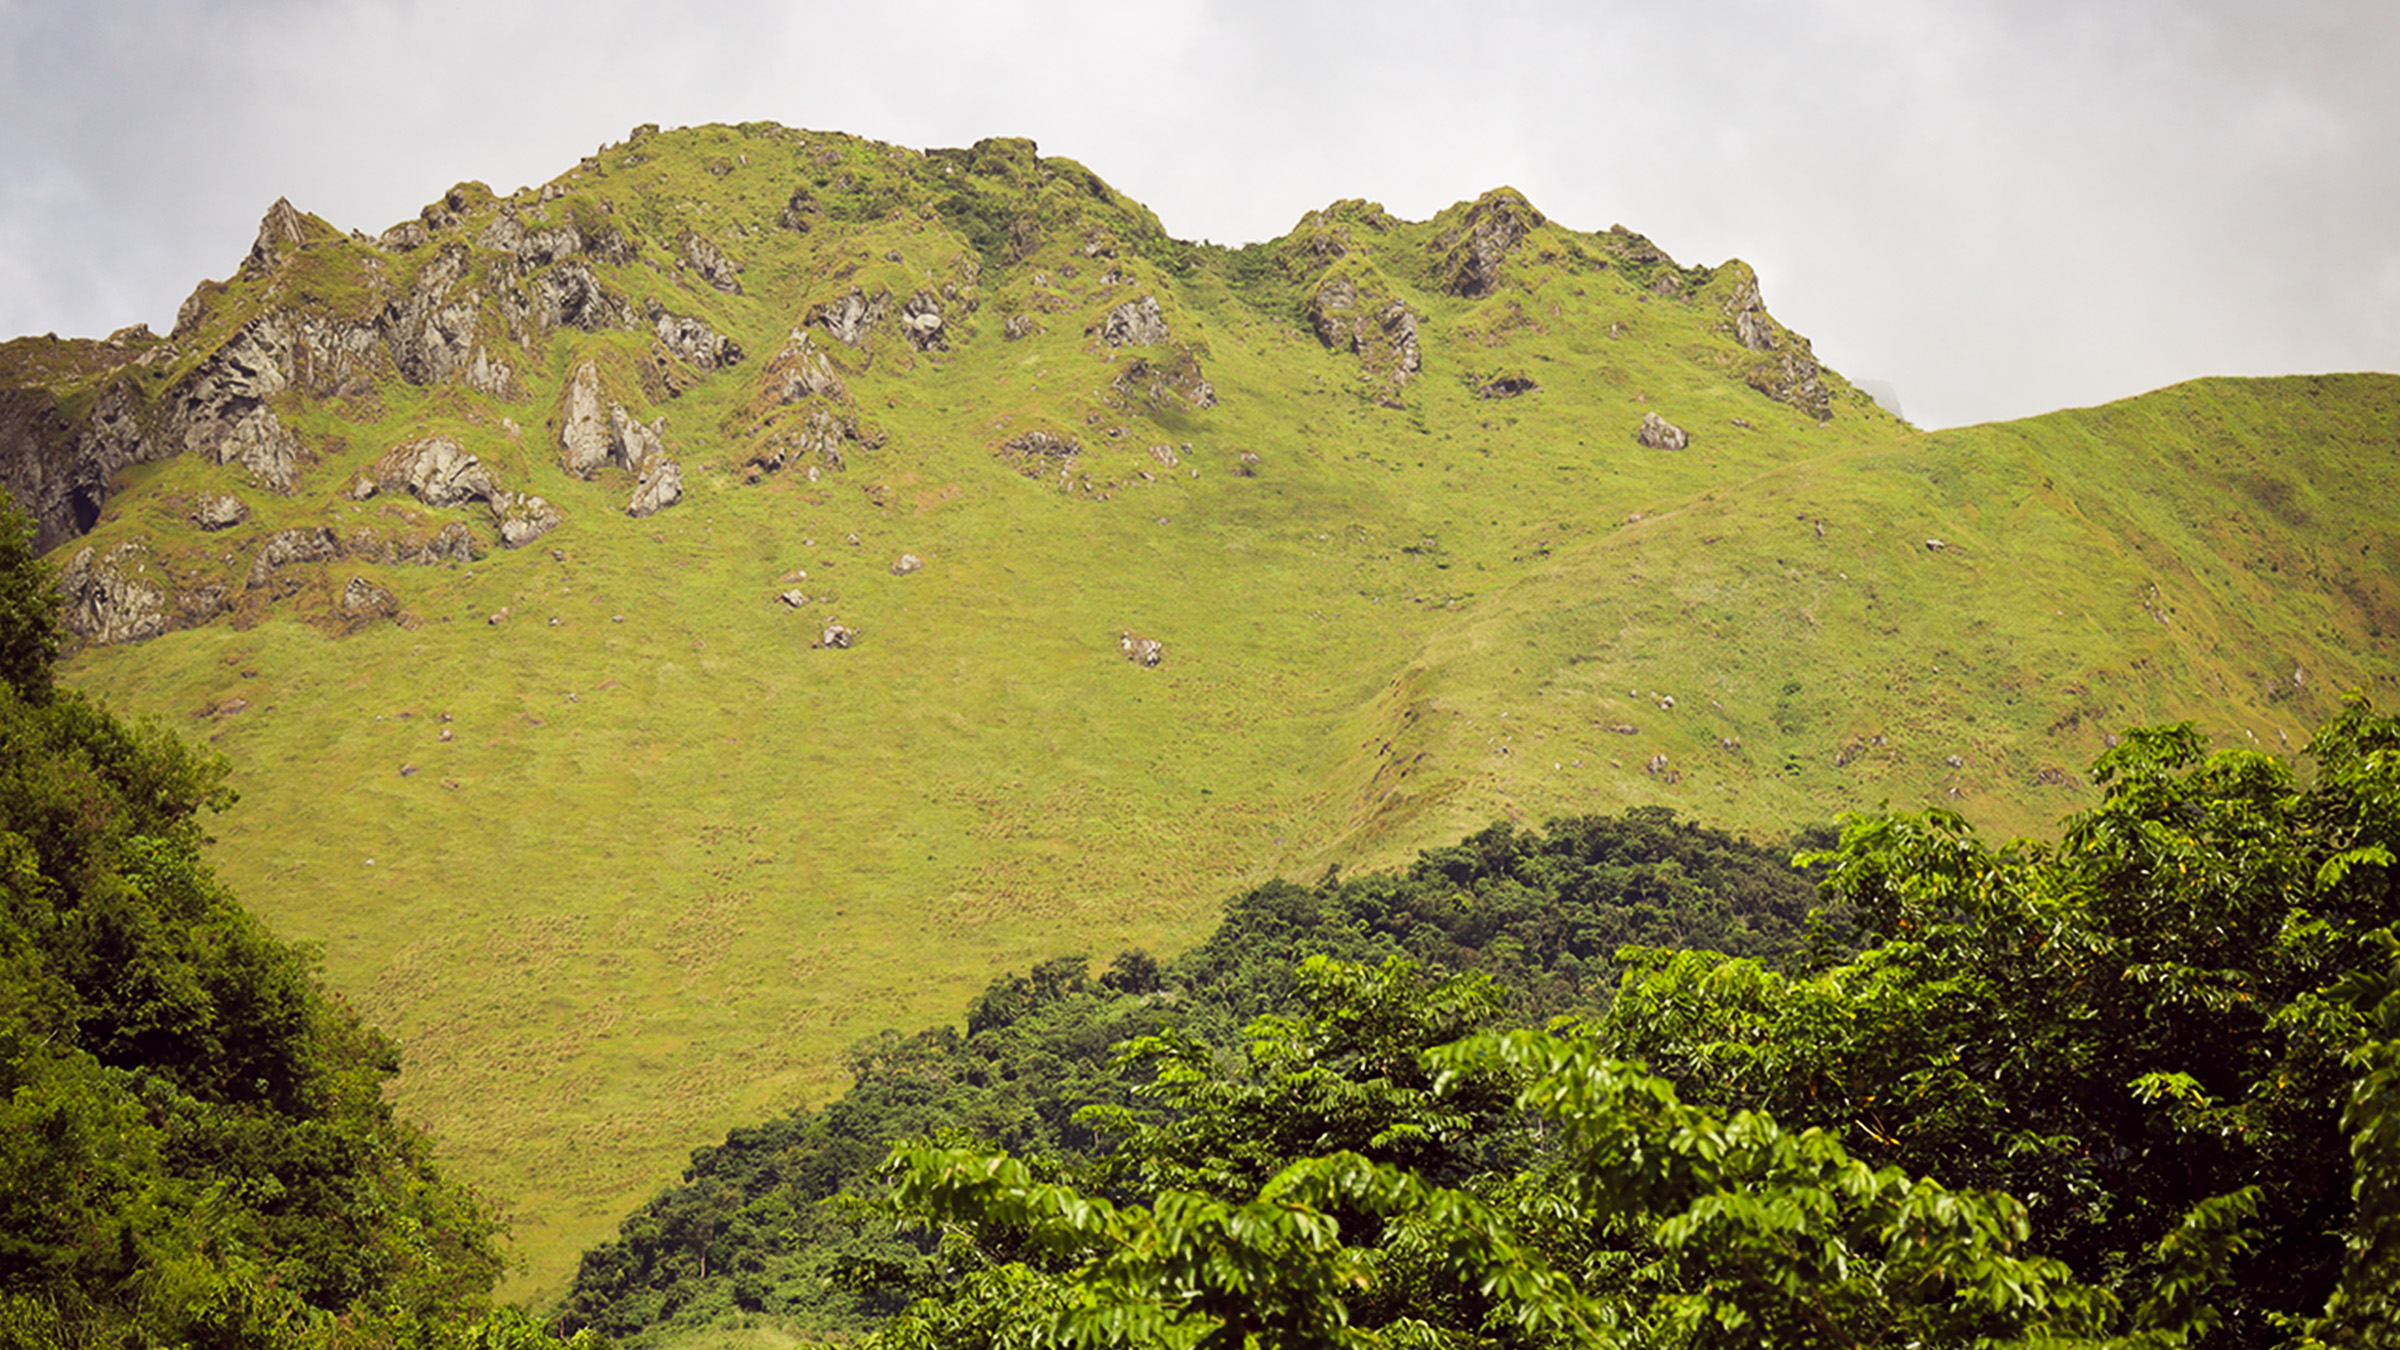 Mt. Malindig, an expansive stratovolcano in Marinduque